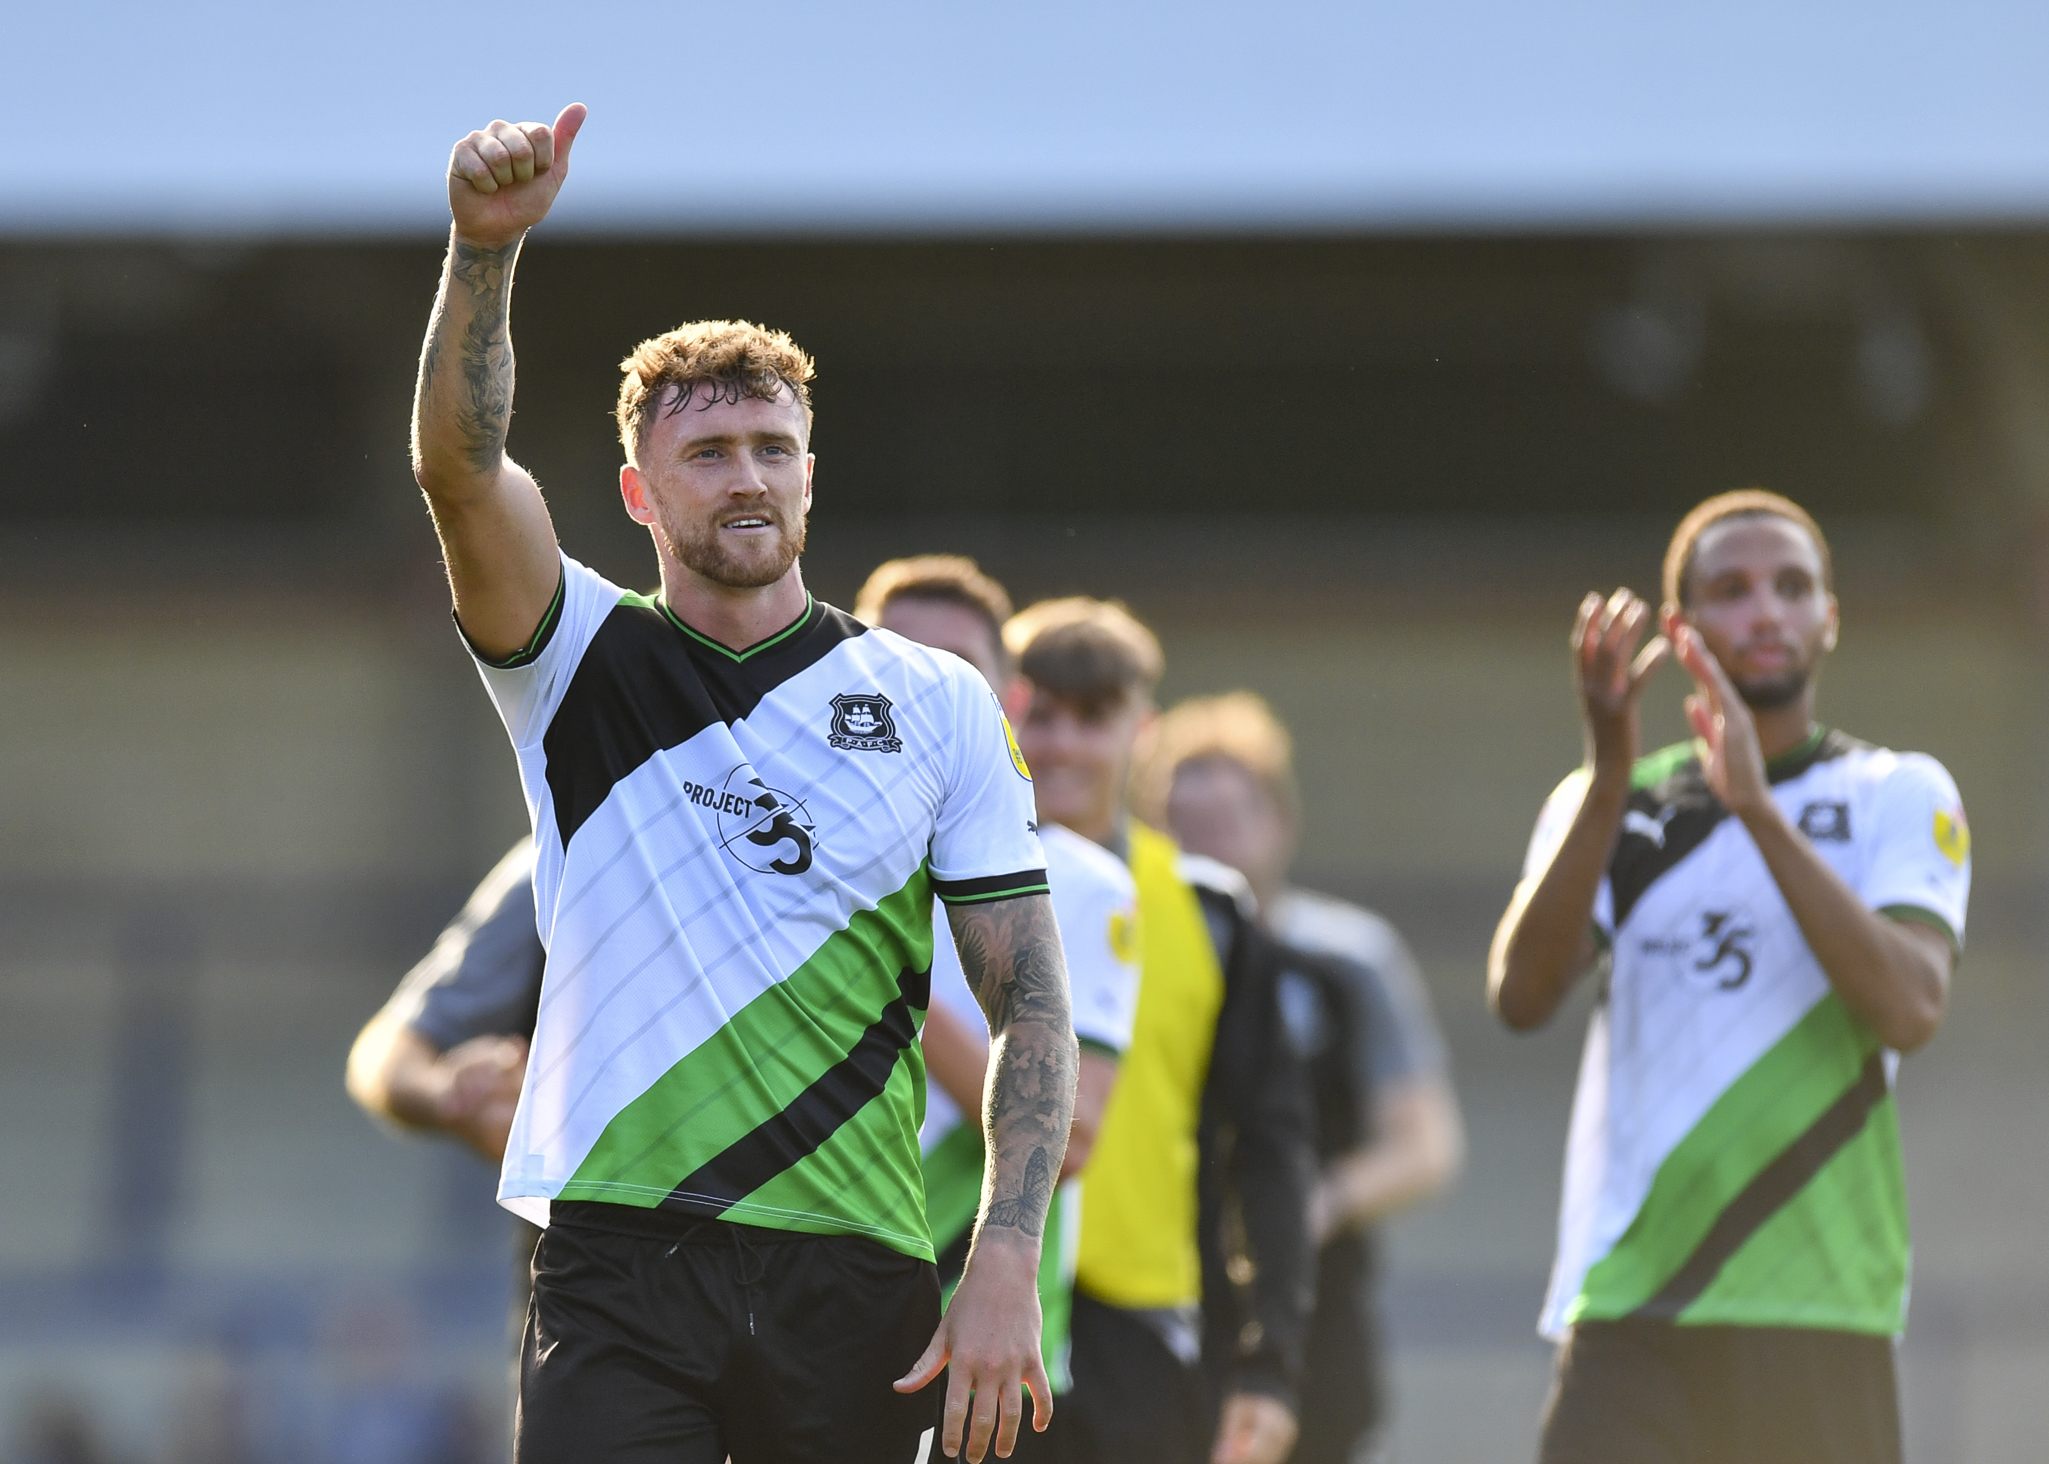 Dan Scarr celebrates the win at Wycombe